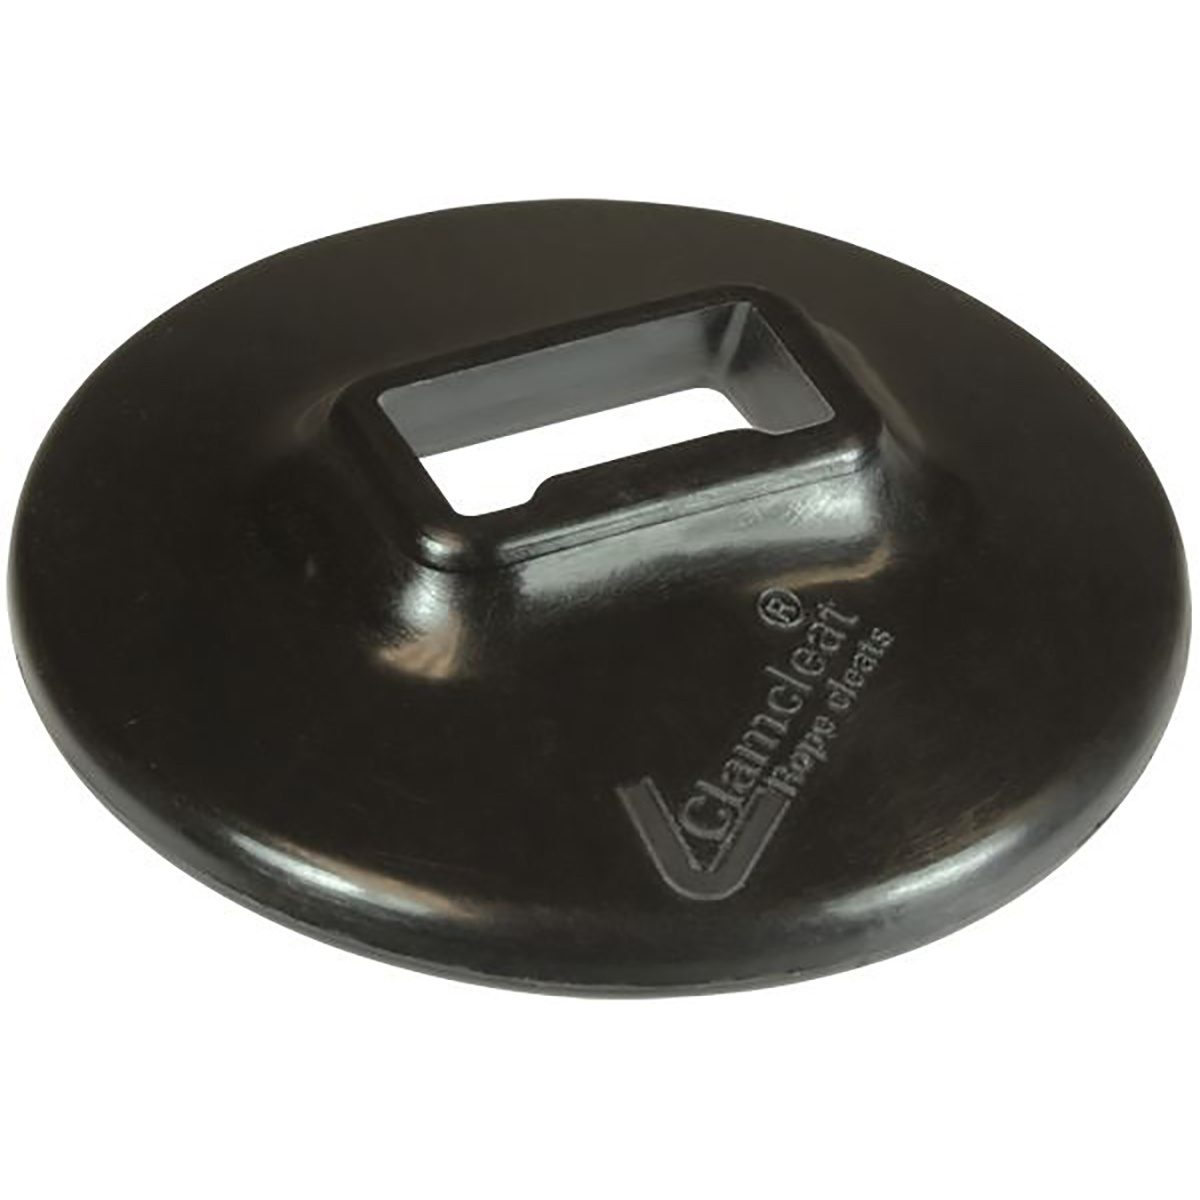 C834T - Clamcleat Handle For CL253 (Pk Size: 50)